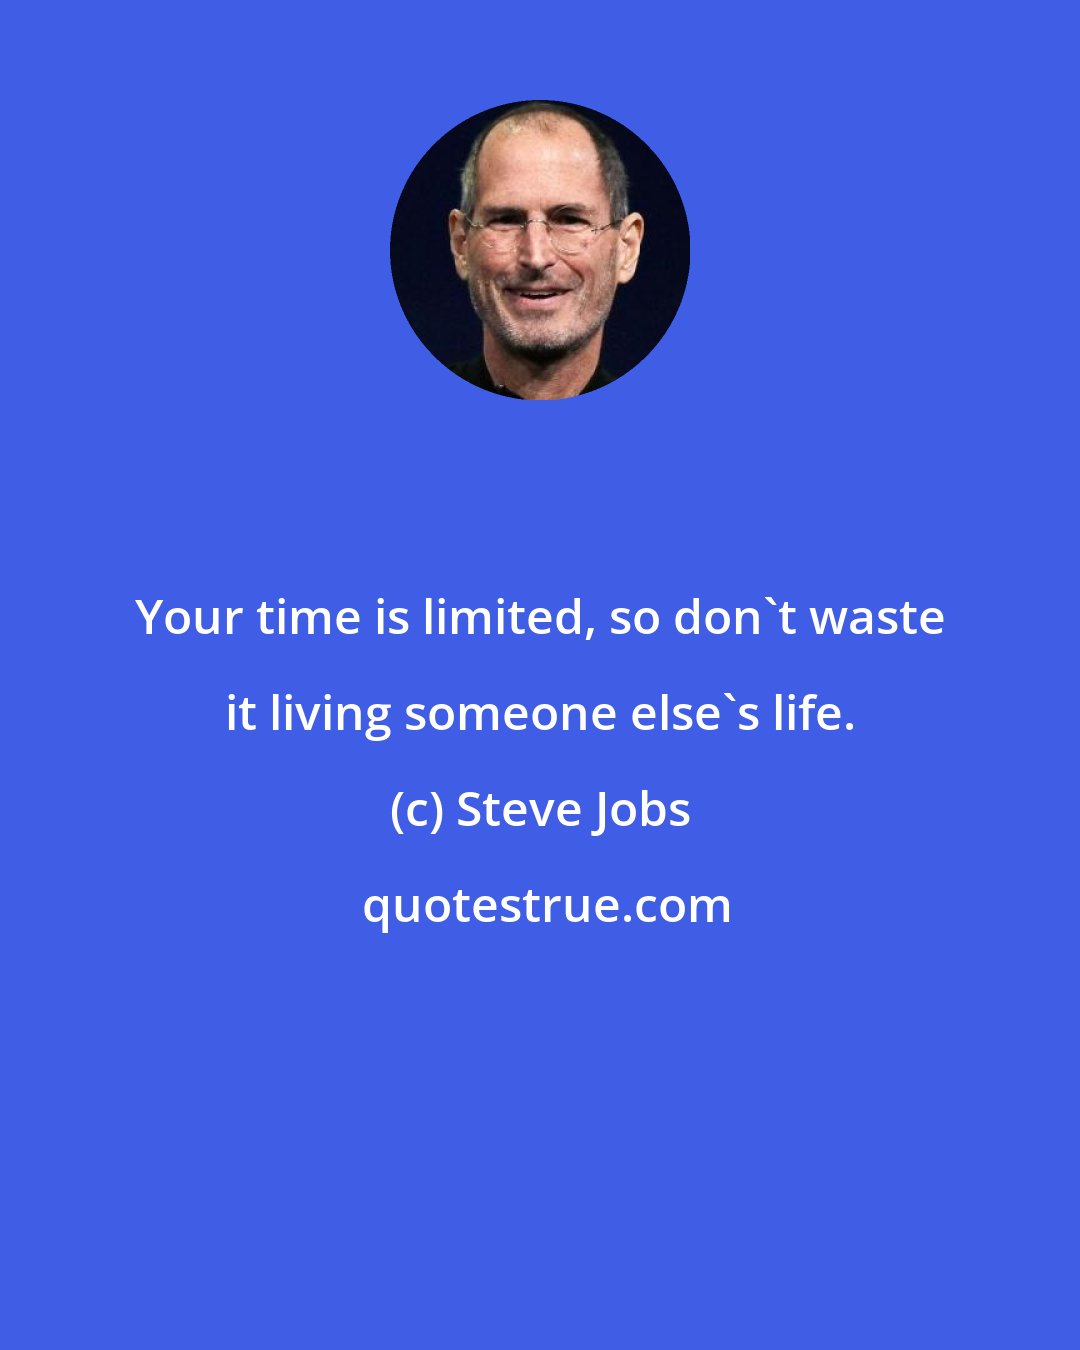 Steve Jobs: Your time is limited, so don't waste it living someone else's life.